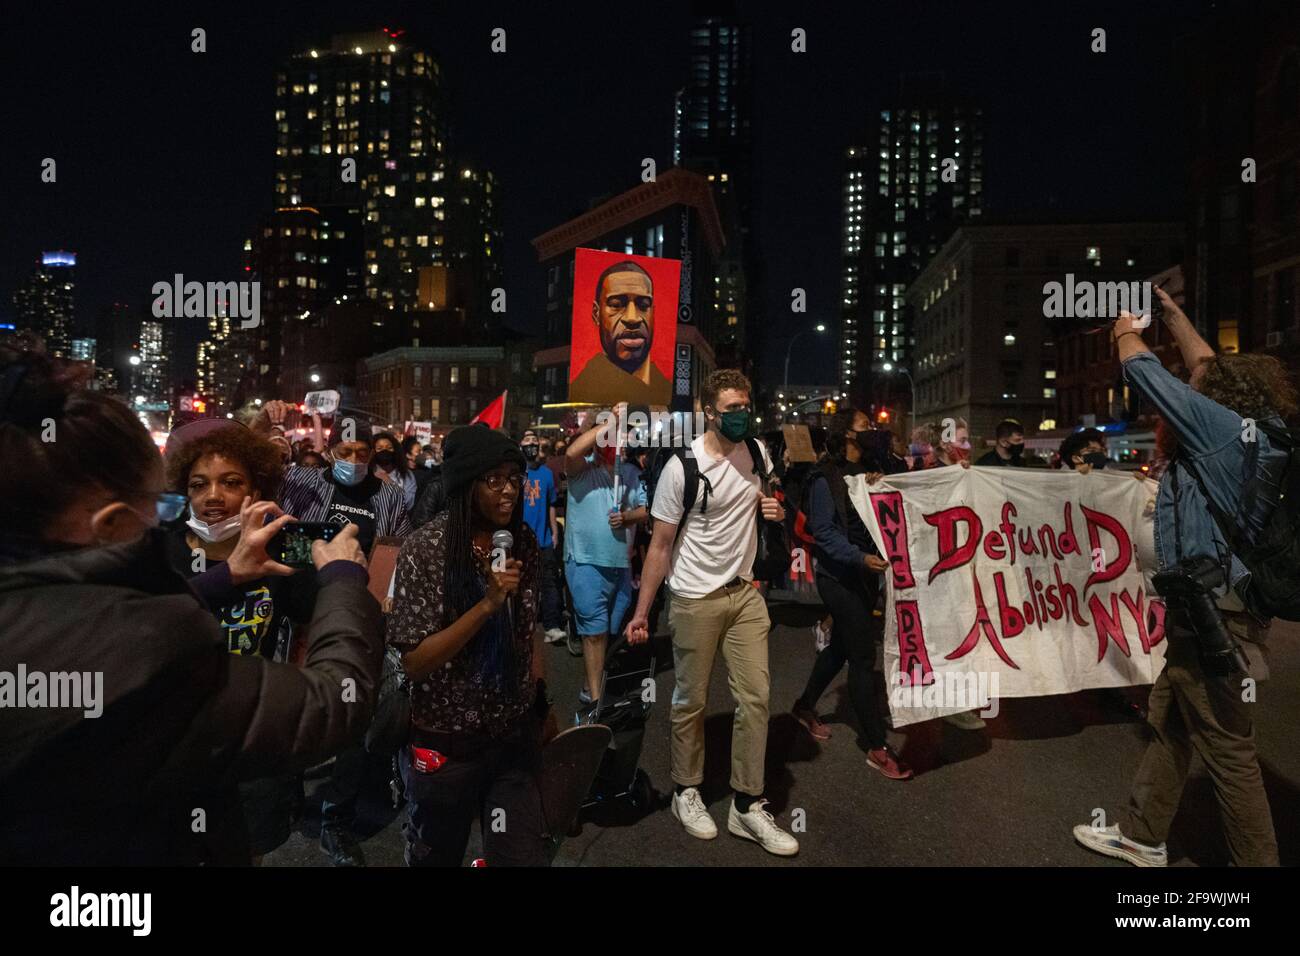 Brooklyn, New York, USA 20 Apr 2021. Protesters march through Brooklyn streets hours after a jury found former Minneapolis police officer Derek Chauvin guilty of murdering George Floyd in 2020. Stock Photo